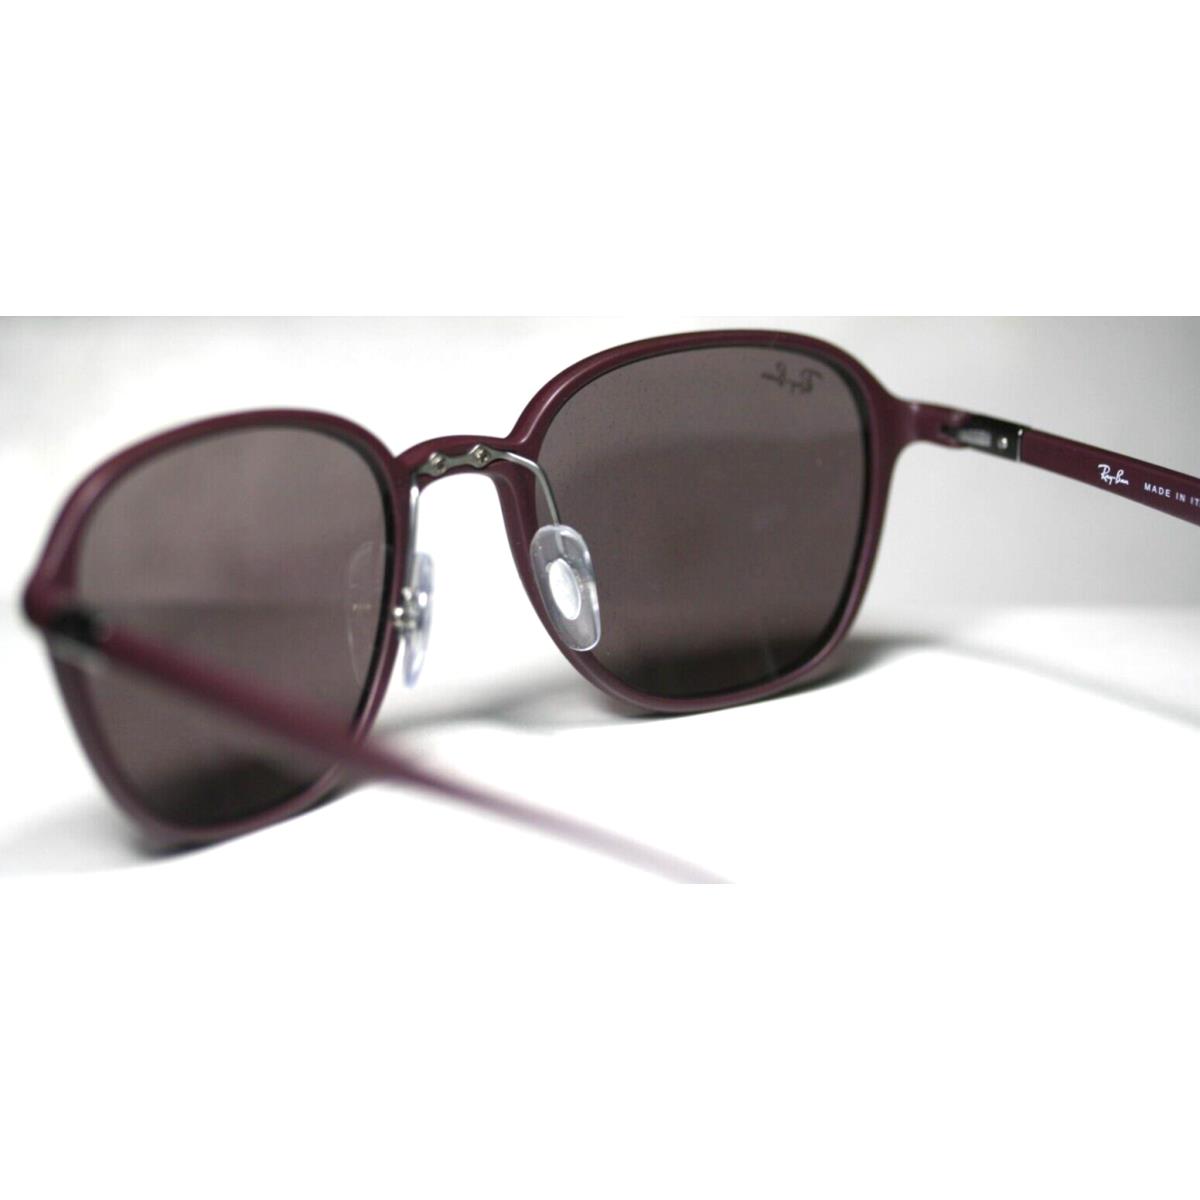 Ray-Ban sunglasses  - Frame: Purple / Red, Lens: Violet